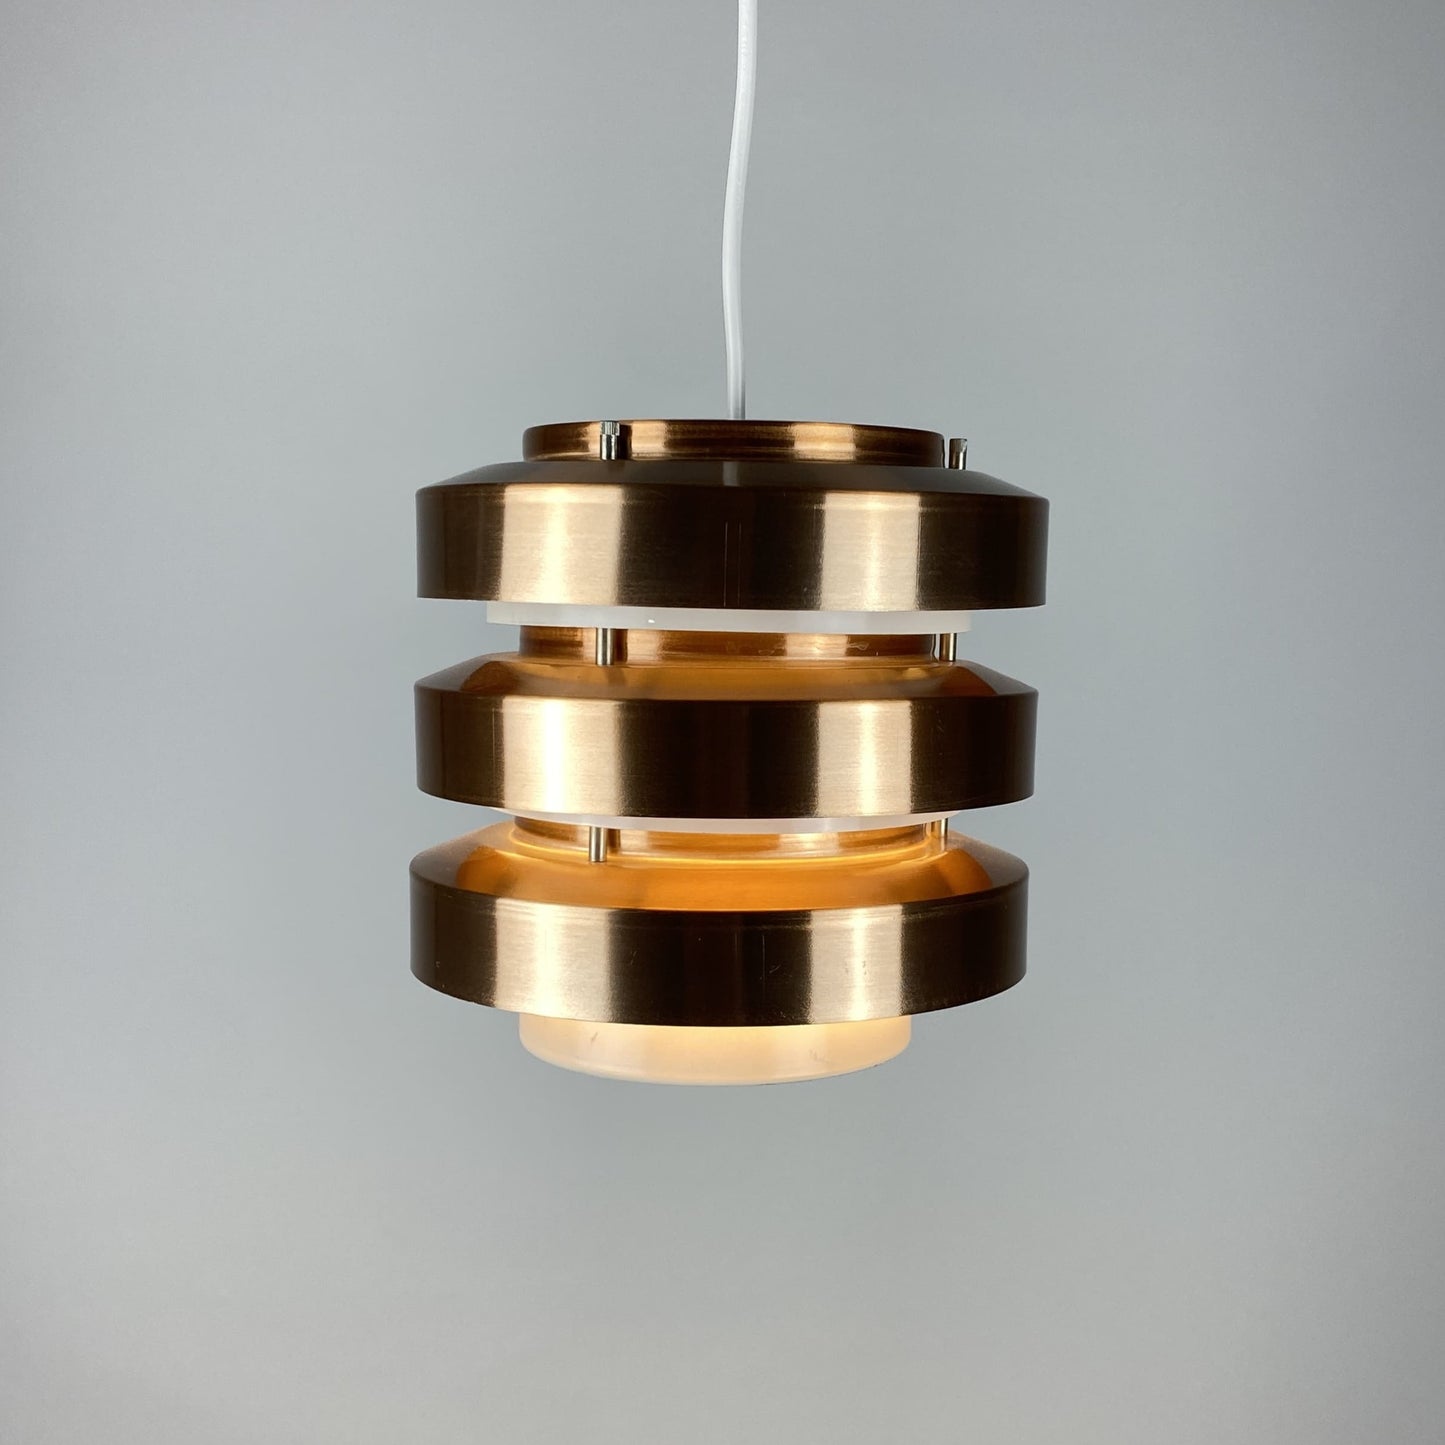 1 of 2 Pendant light made by VEB Metalldrücker Halle from DDR (East-germany) 1970